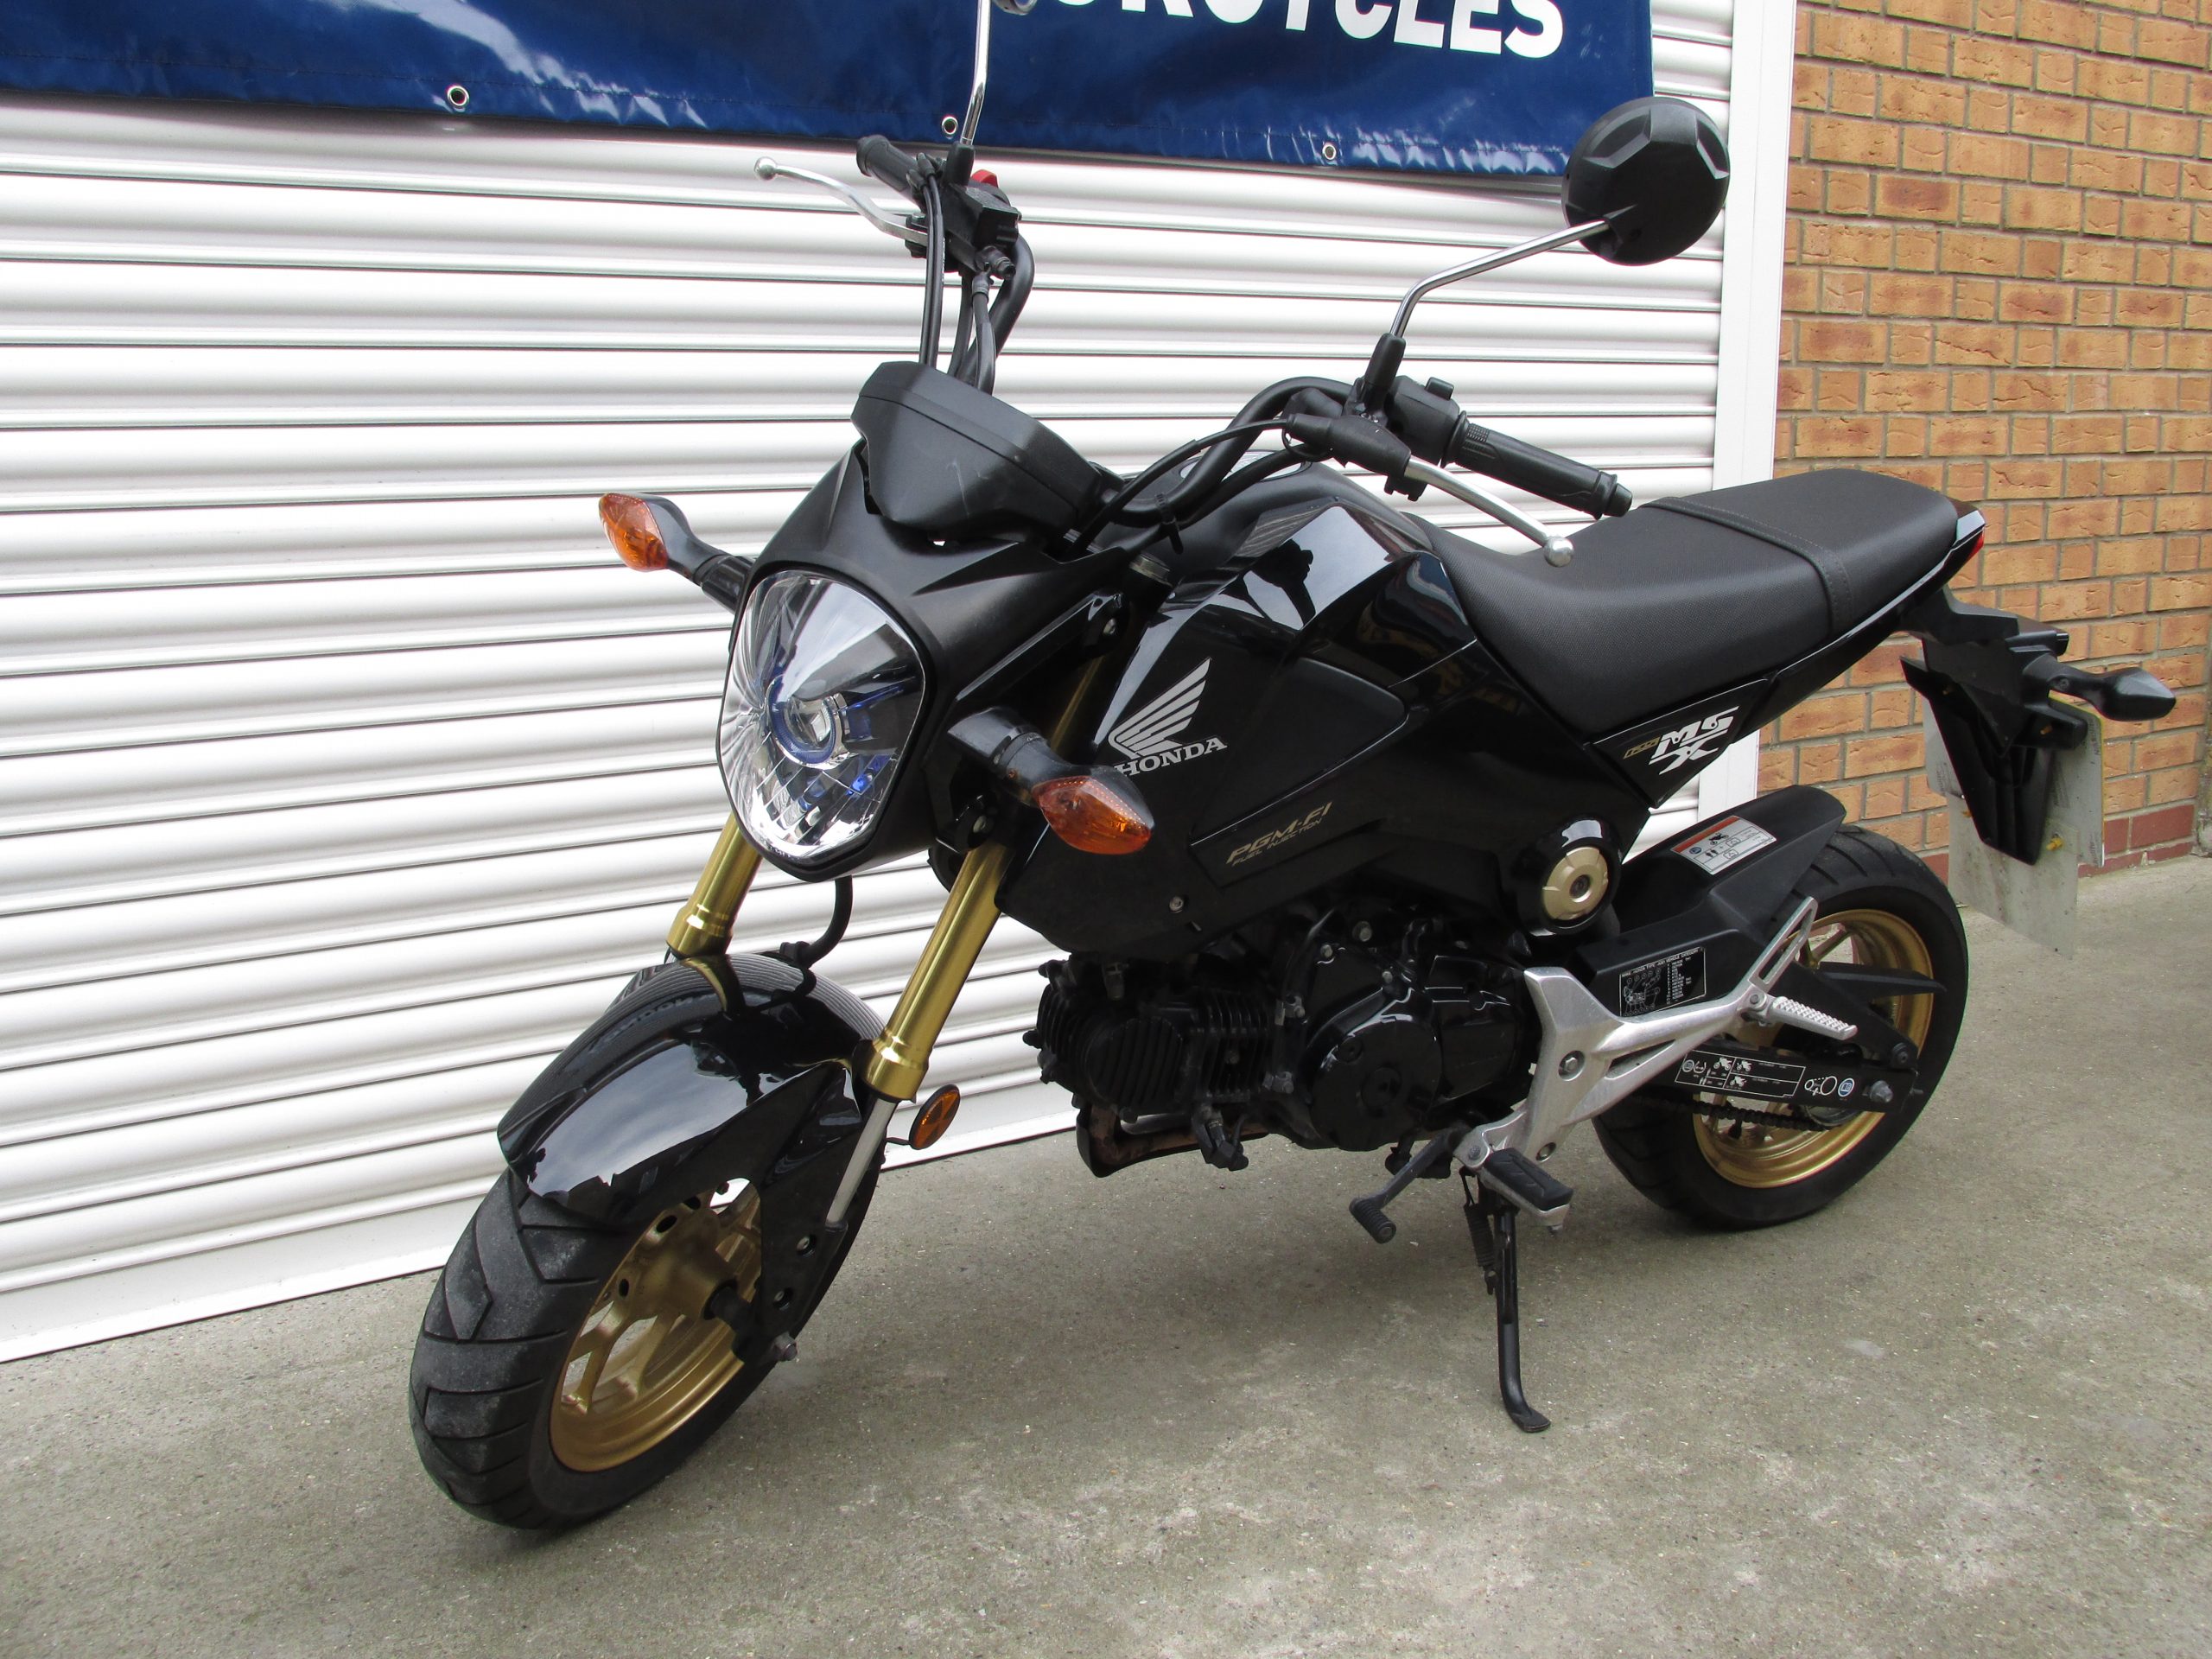  Honda MSX 125  for Sale in Hammermith London Motorcycles